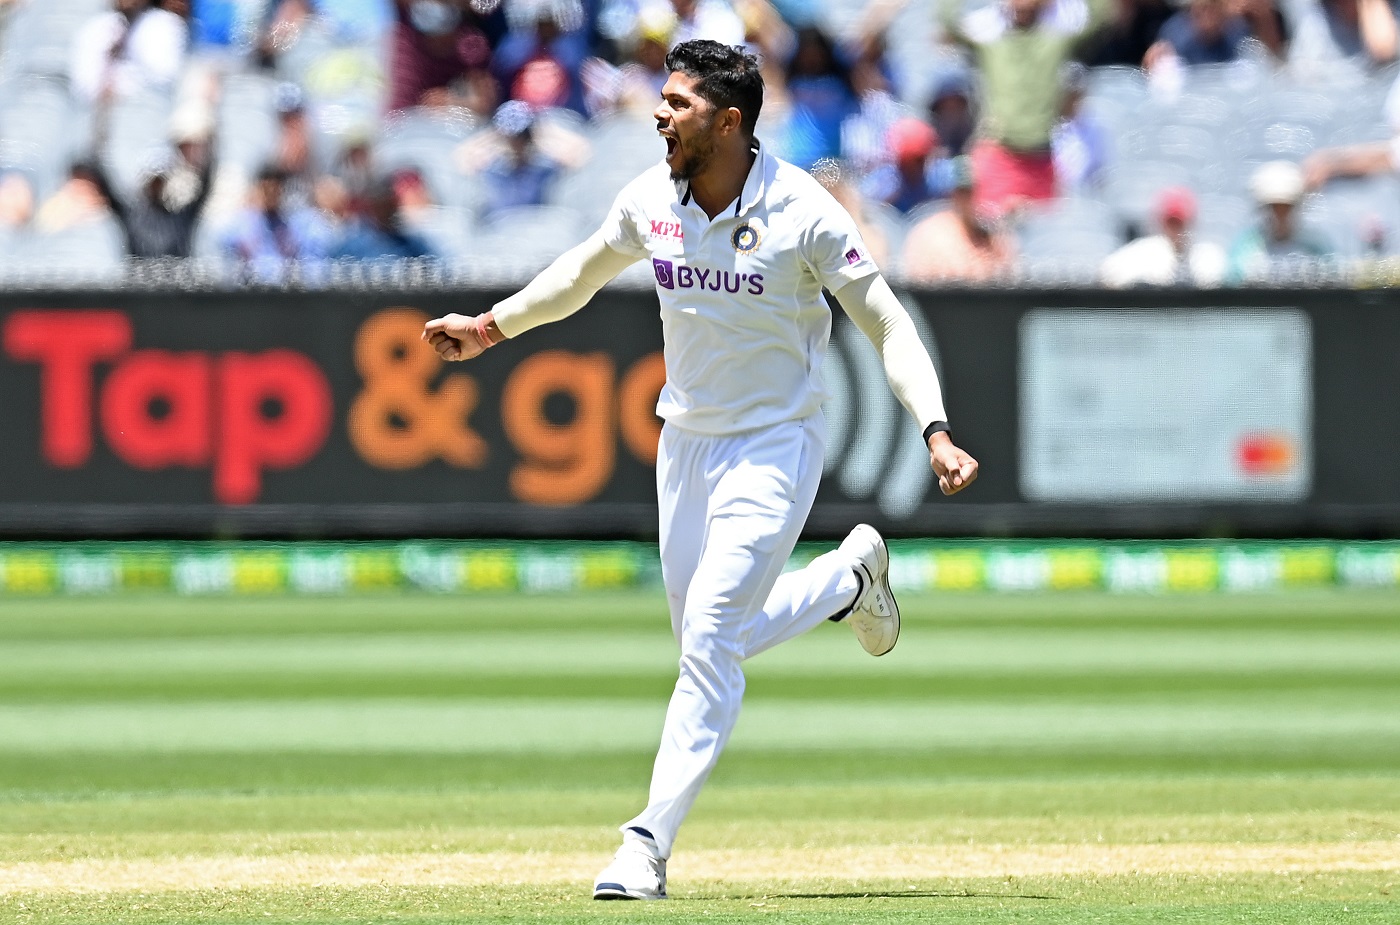 IND vs NZ Live: Umesh Yadav declares that the ball needs to be bowled a tad slower on the Kanpur wicket in order to get more swing.